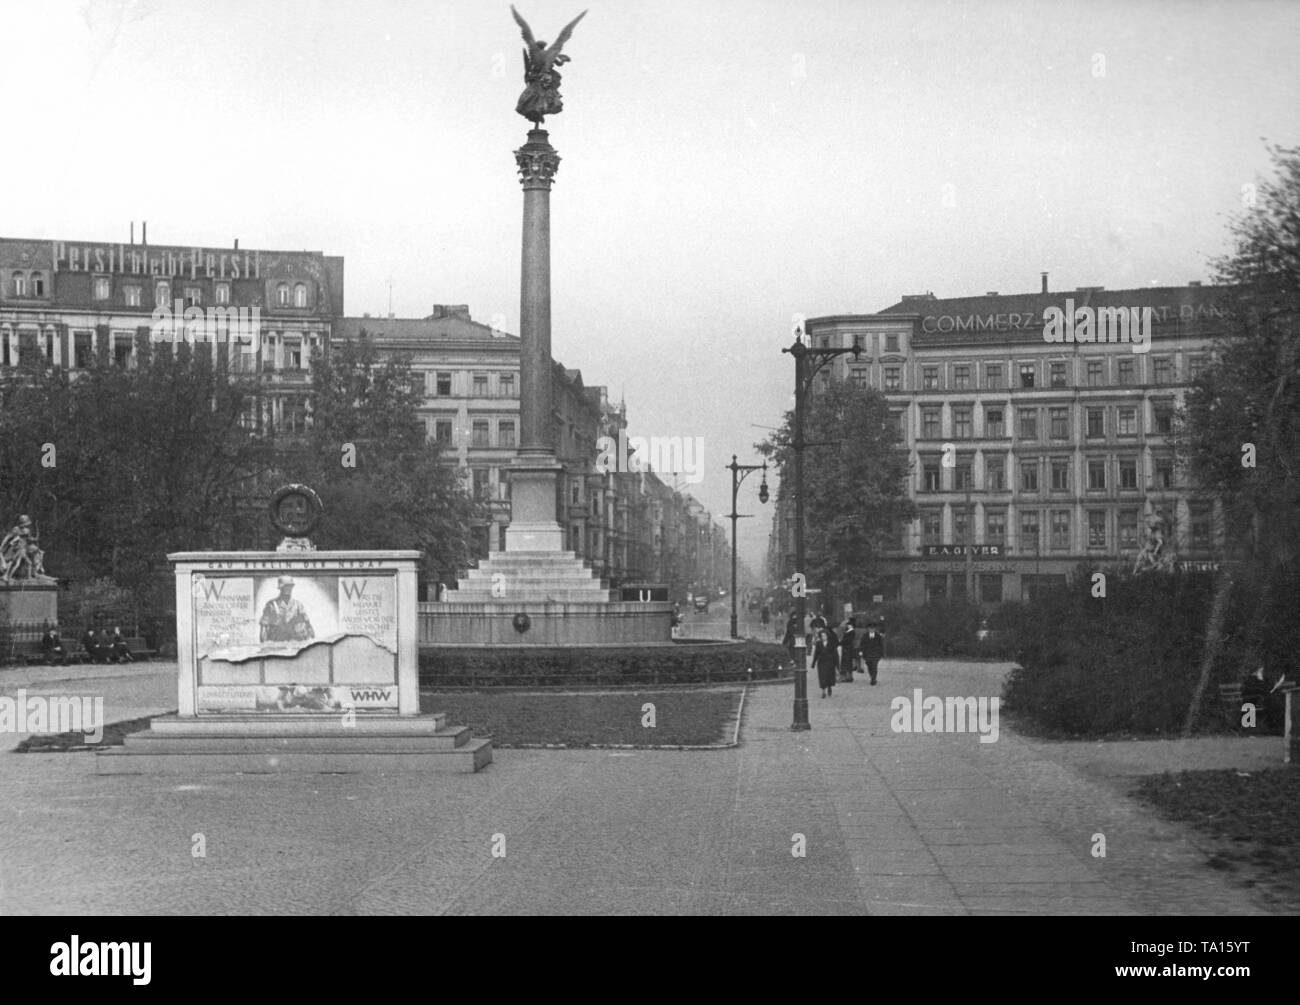 View of the Belle-Alliance-Platz (today's Mehringplatz) with the Friedenssaeule in Berlin. In the background the Friedrichstrasse. Left the Friedrichstrasse facade advertising of Persil, right of the Commerz - und Privatbank. In front of the Friedenssaeule, partly torn-down posters hang on a notice board of the Gau Berlin with the morale-boosting slogans: 'When we think of the sacrifices of our soldiers, their dedication, then every sacrifice of the homeland is utterly meaningless and insignificant' and 'What the homeland achieves must some day withstand the test of history'. Stock Photo